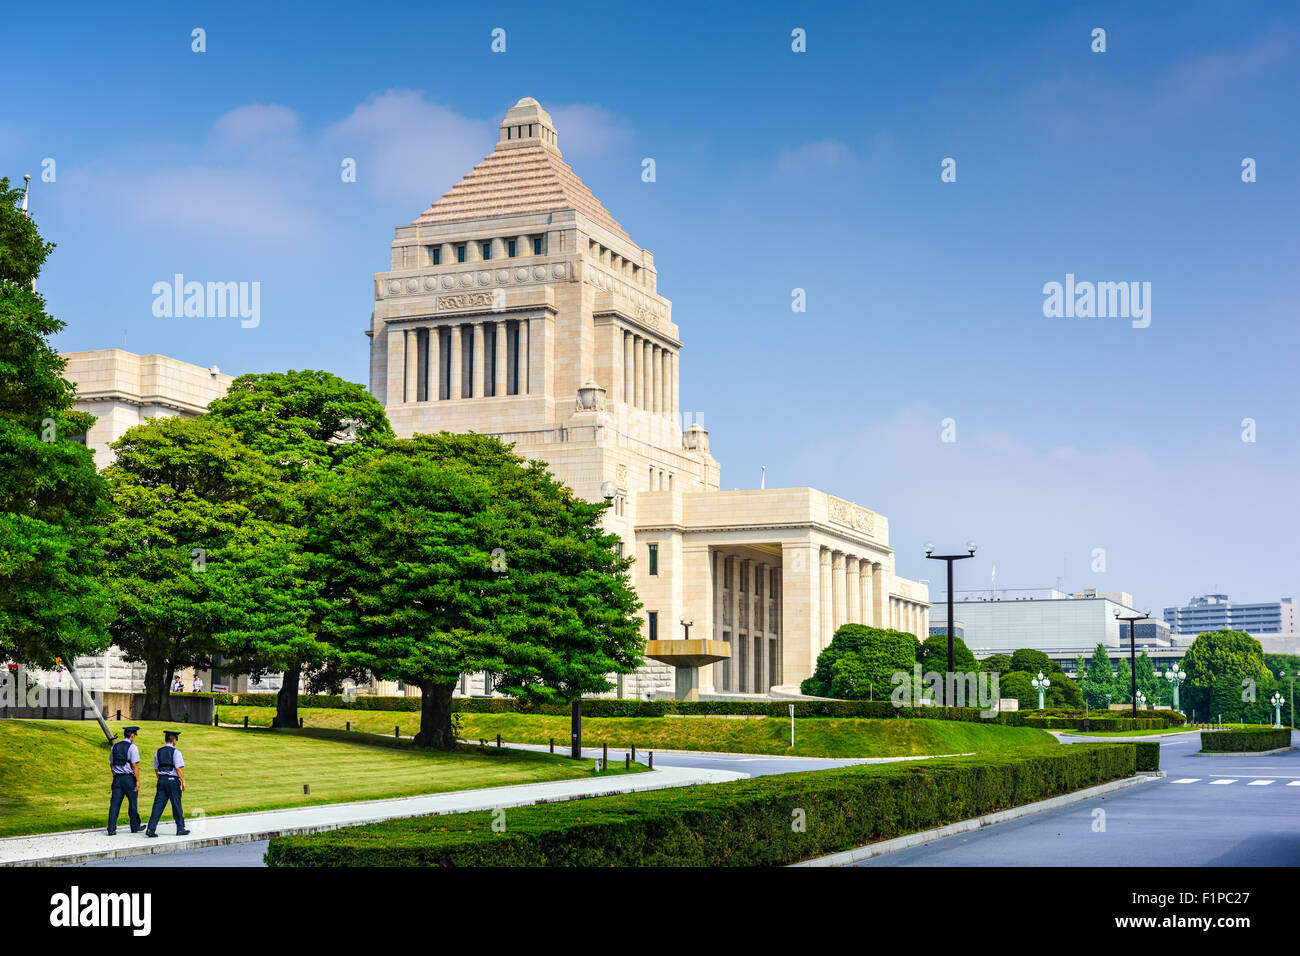 TOKYO, JAPAN - JULY 31 2015: The National Diet Building of Japan. Stock Photo